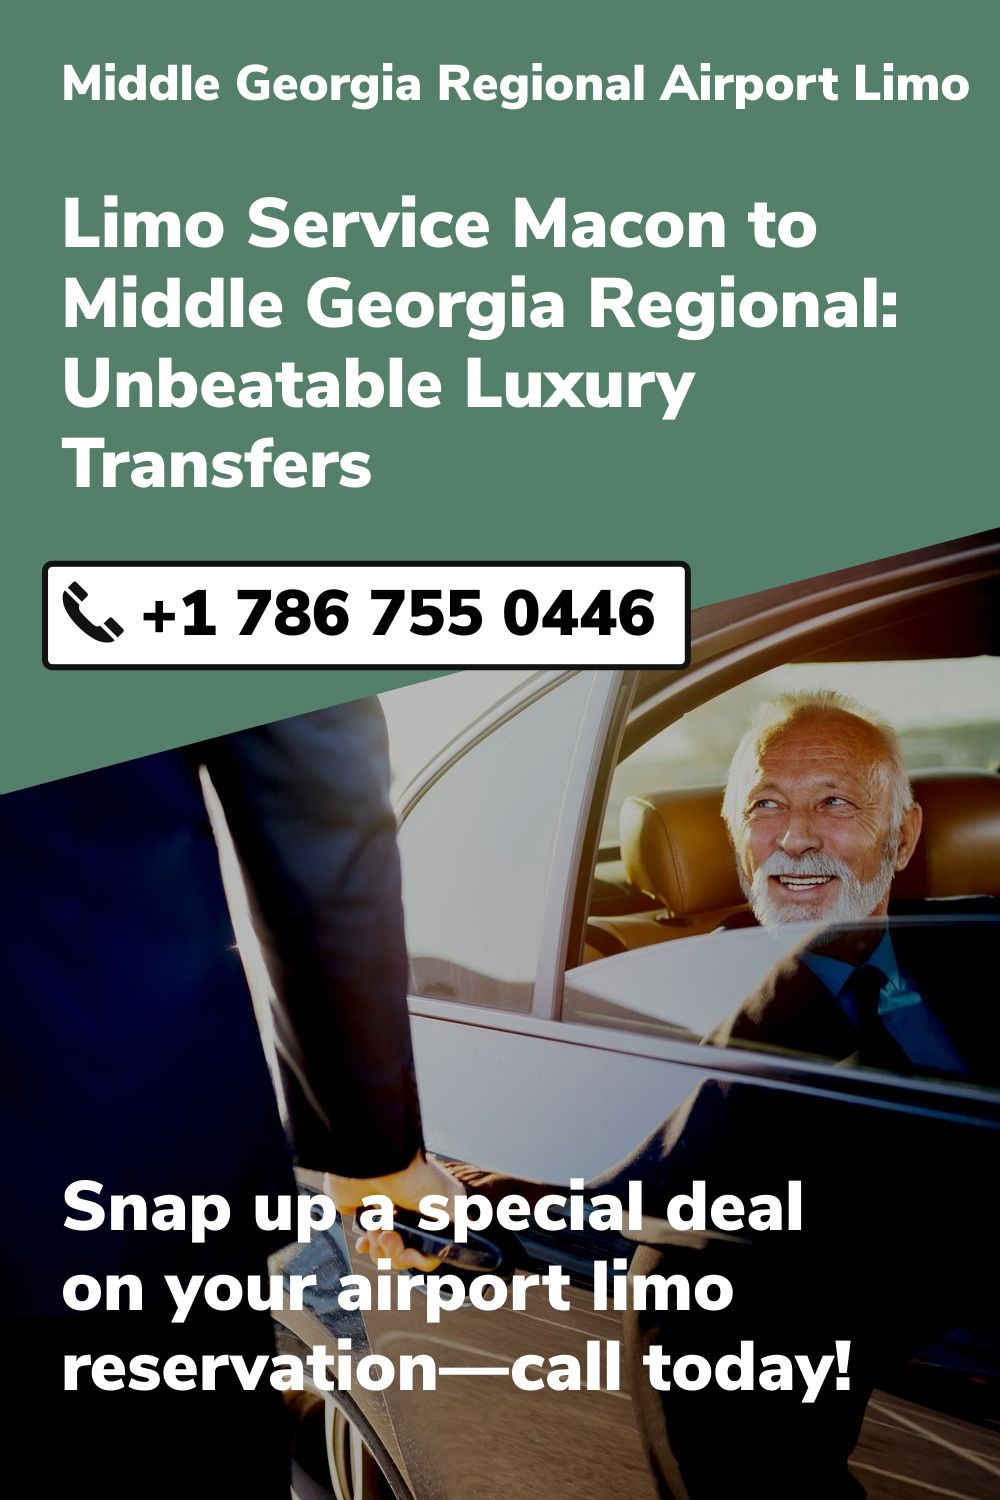 Middle Georgia Regional Airport Limo